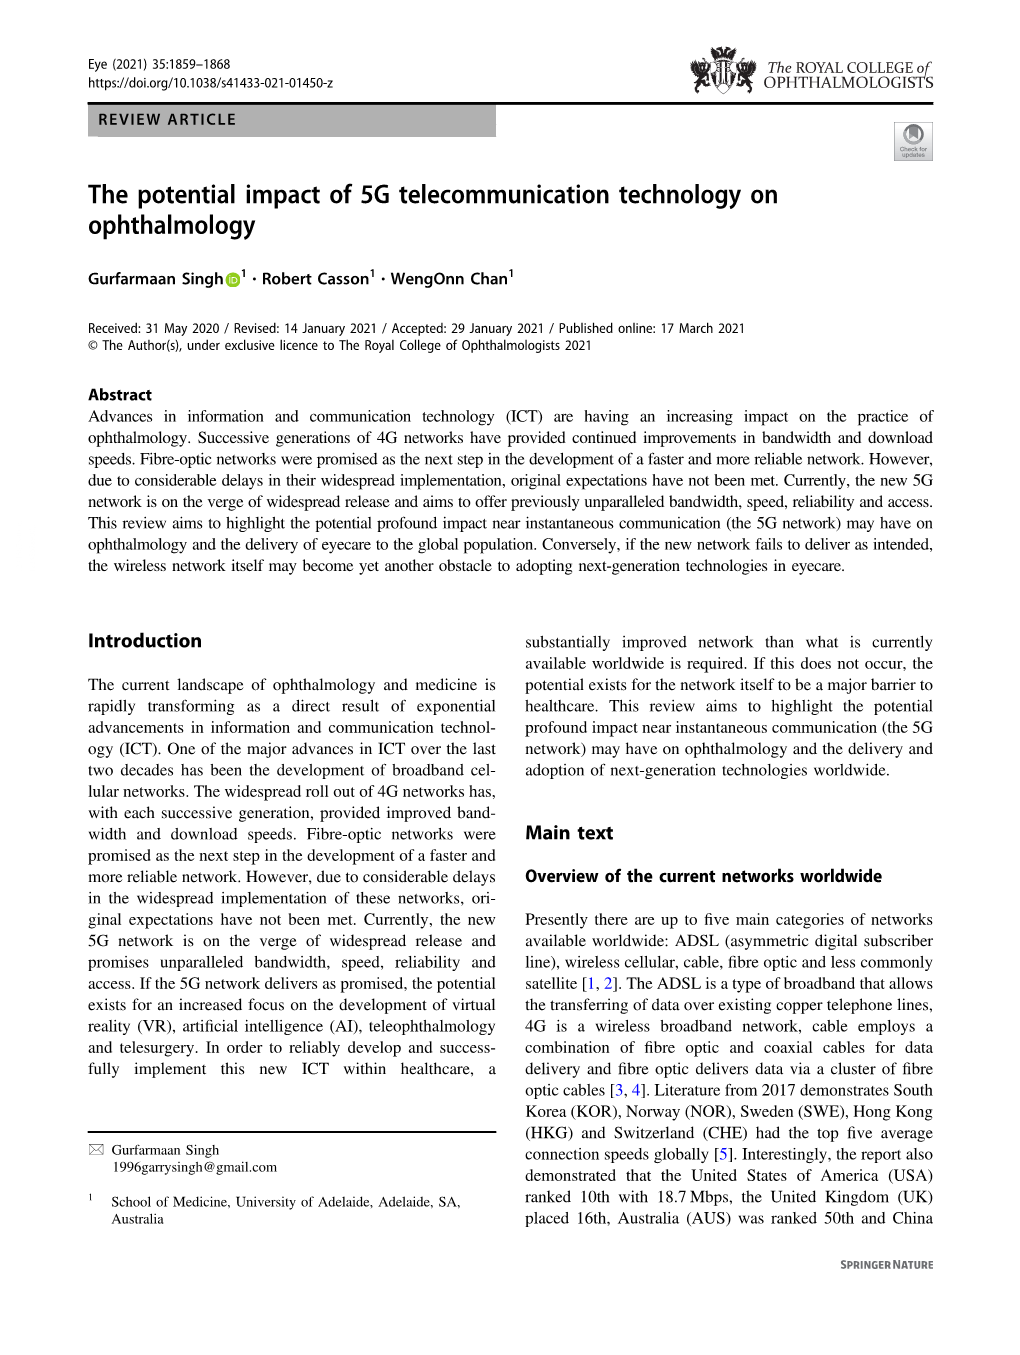 The Potential Impact of 5G Telecommunication Technology on Ophthalmology